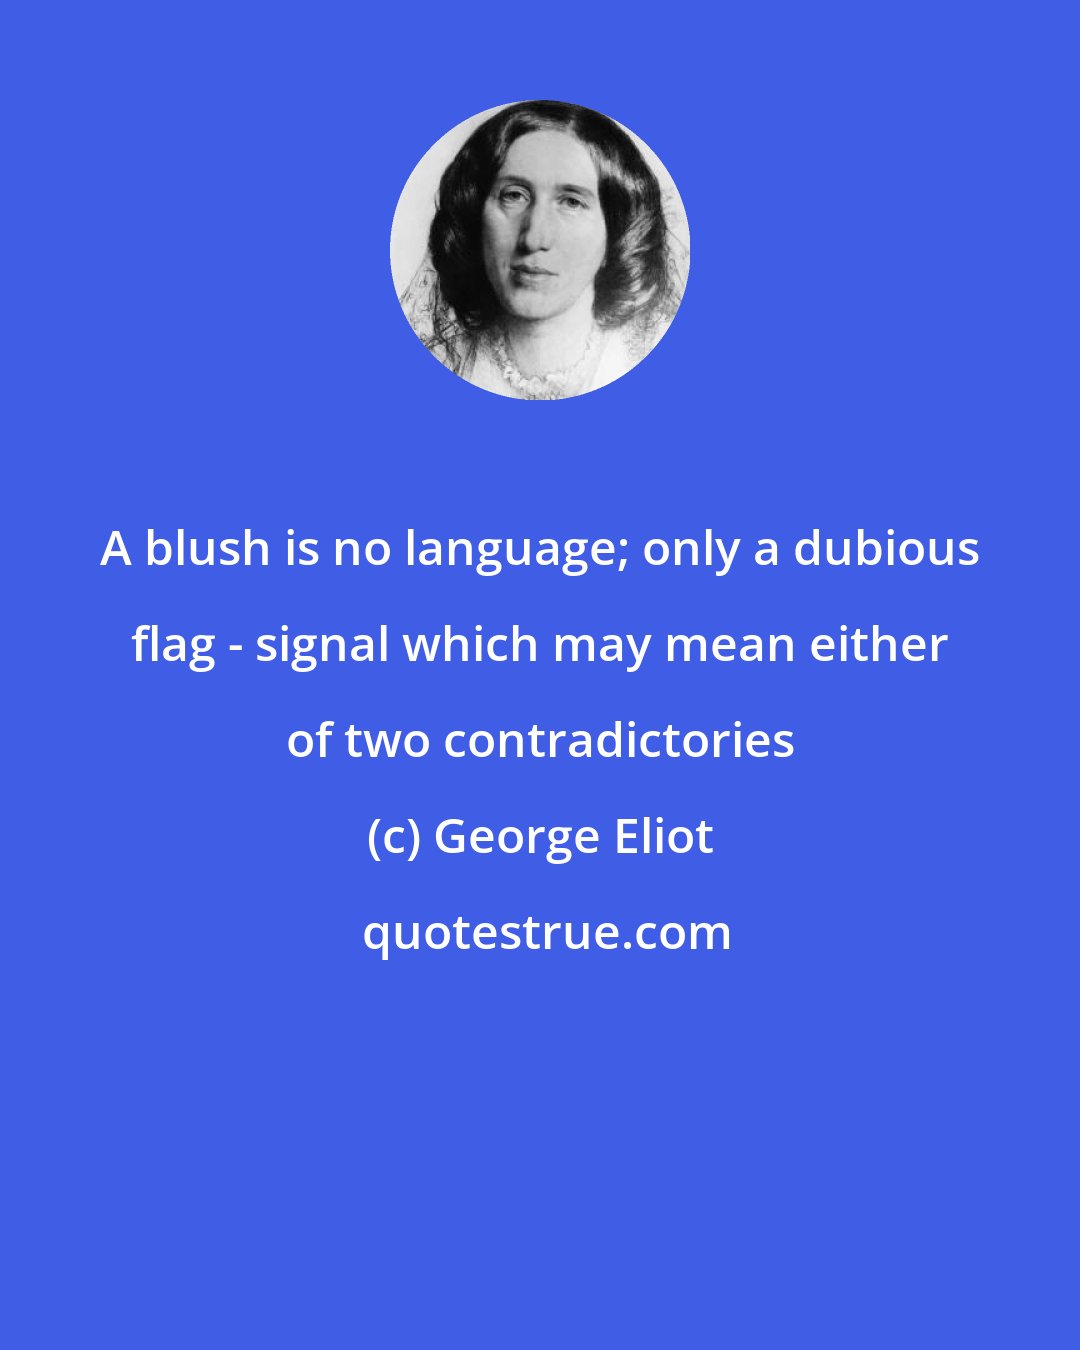 George Eliot: A blush is no language; only a dubious flag - signal which may mean either of two contradictories